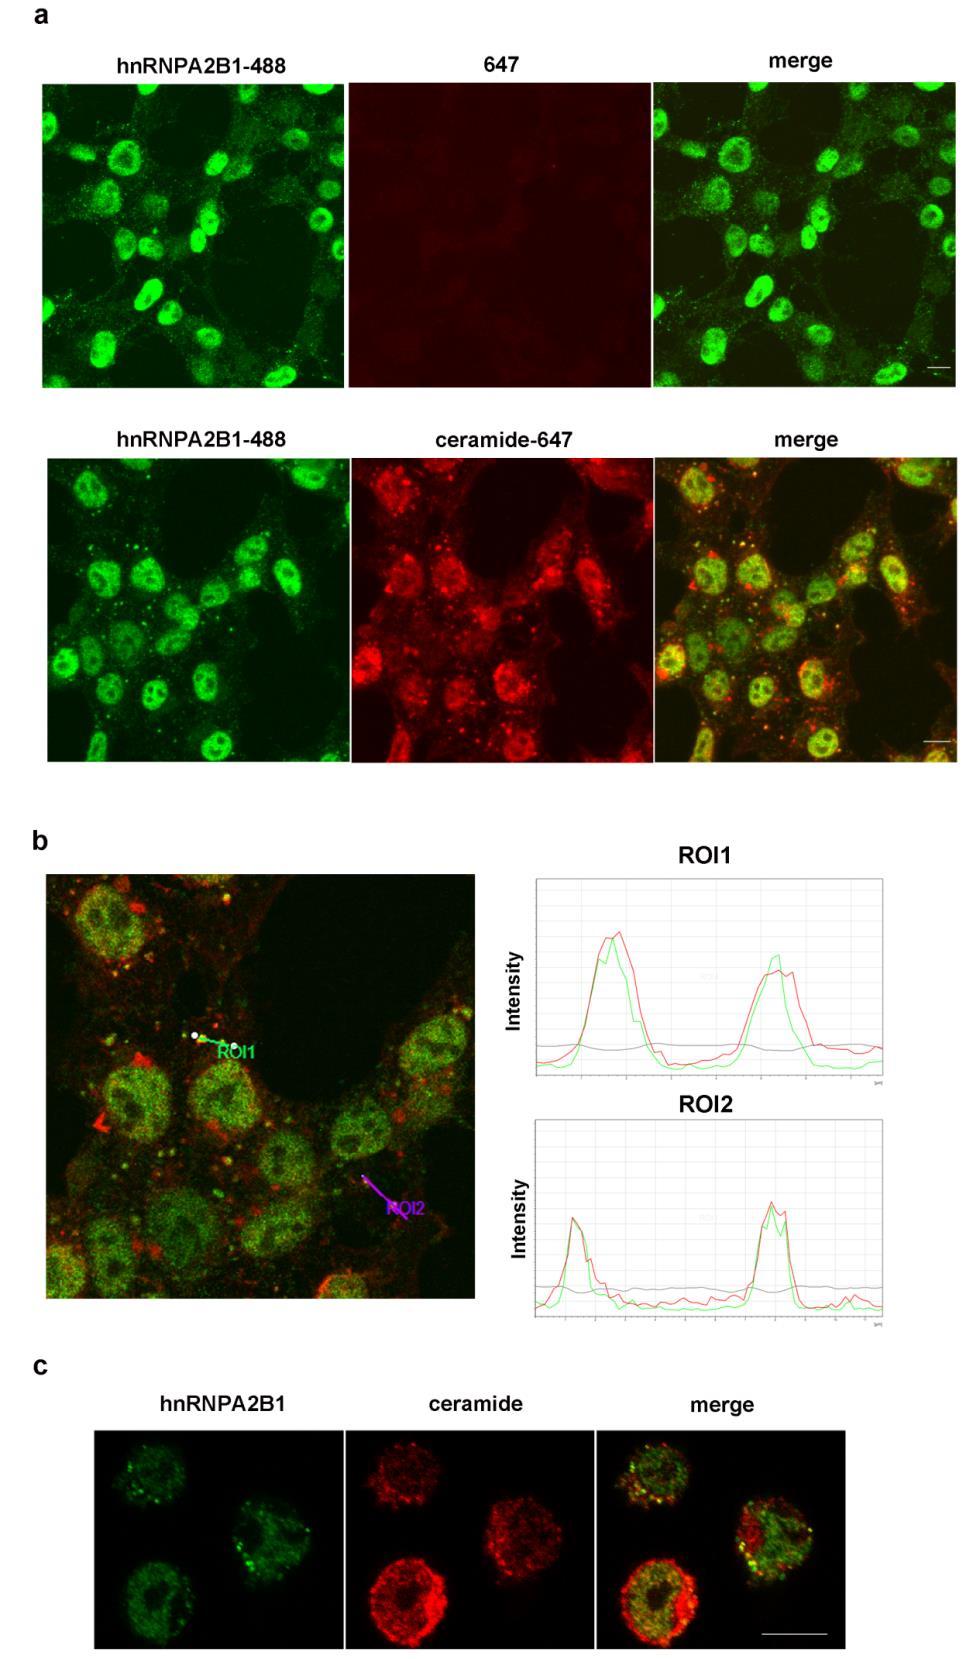 Supplementary Figure S5. HnRNPA2B1 presence in Multivesicular Bodies. (a) Confocal microscopy analysis of hnrnpa2b1 (green) and ceramide (red) colocalization in the cytoplasm of HEK293T cells.